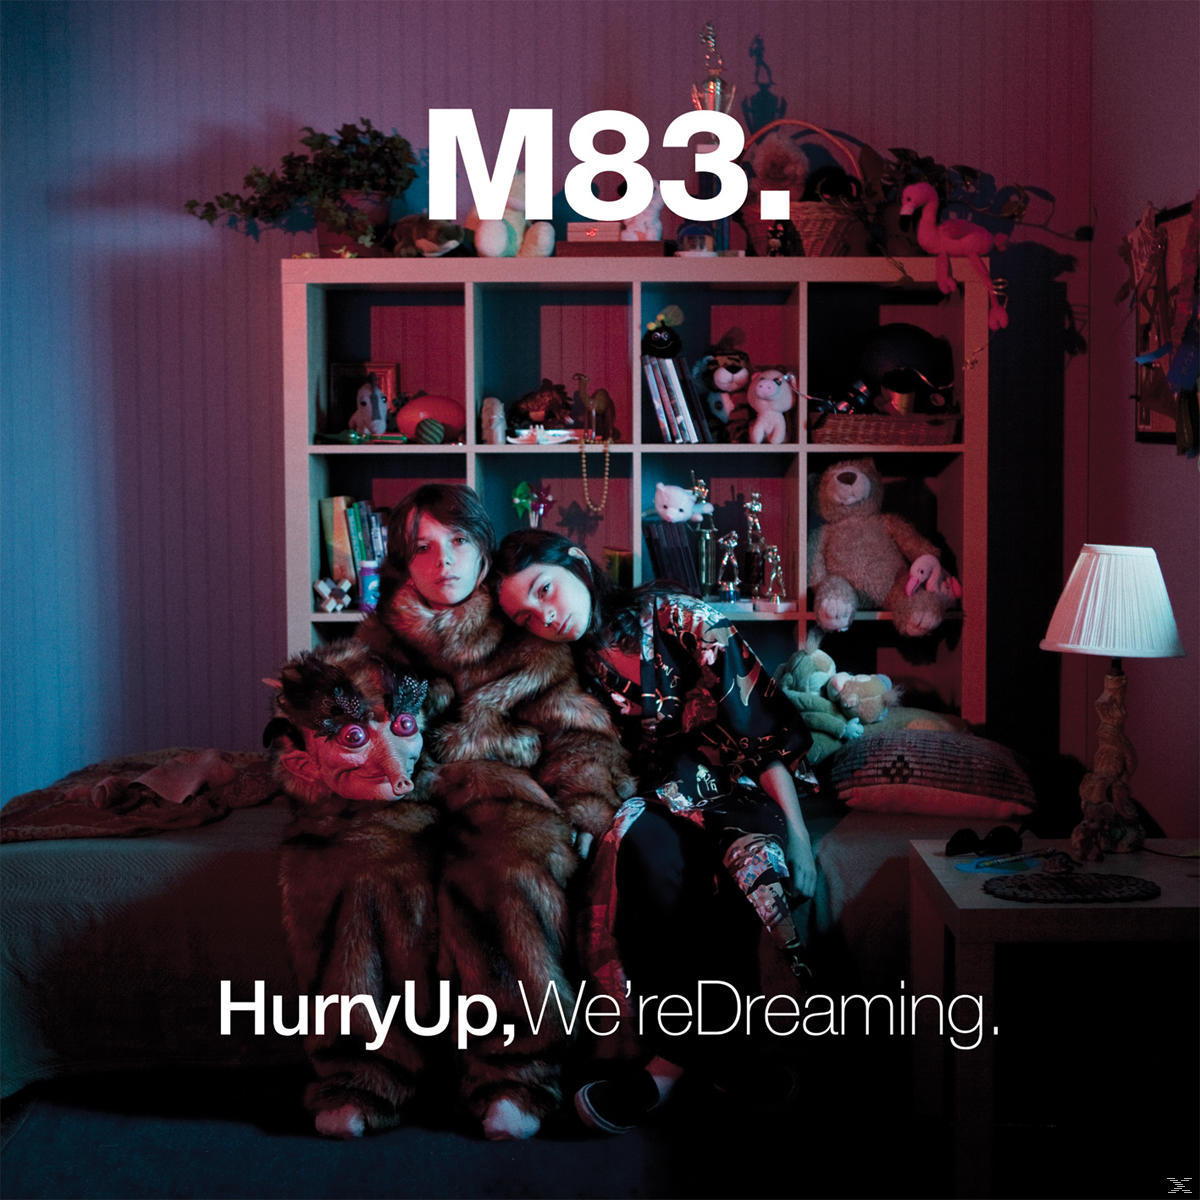 - M83 Hurry We\'re Dreaming. Up, (Vinyl) -